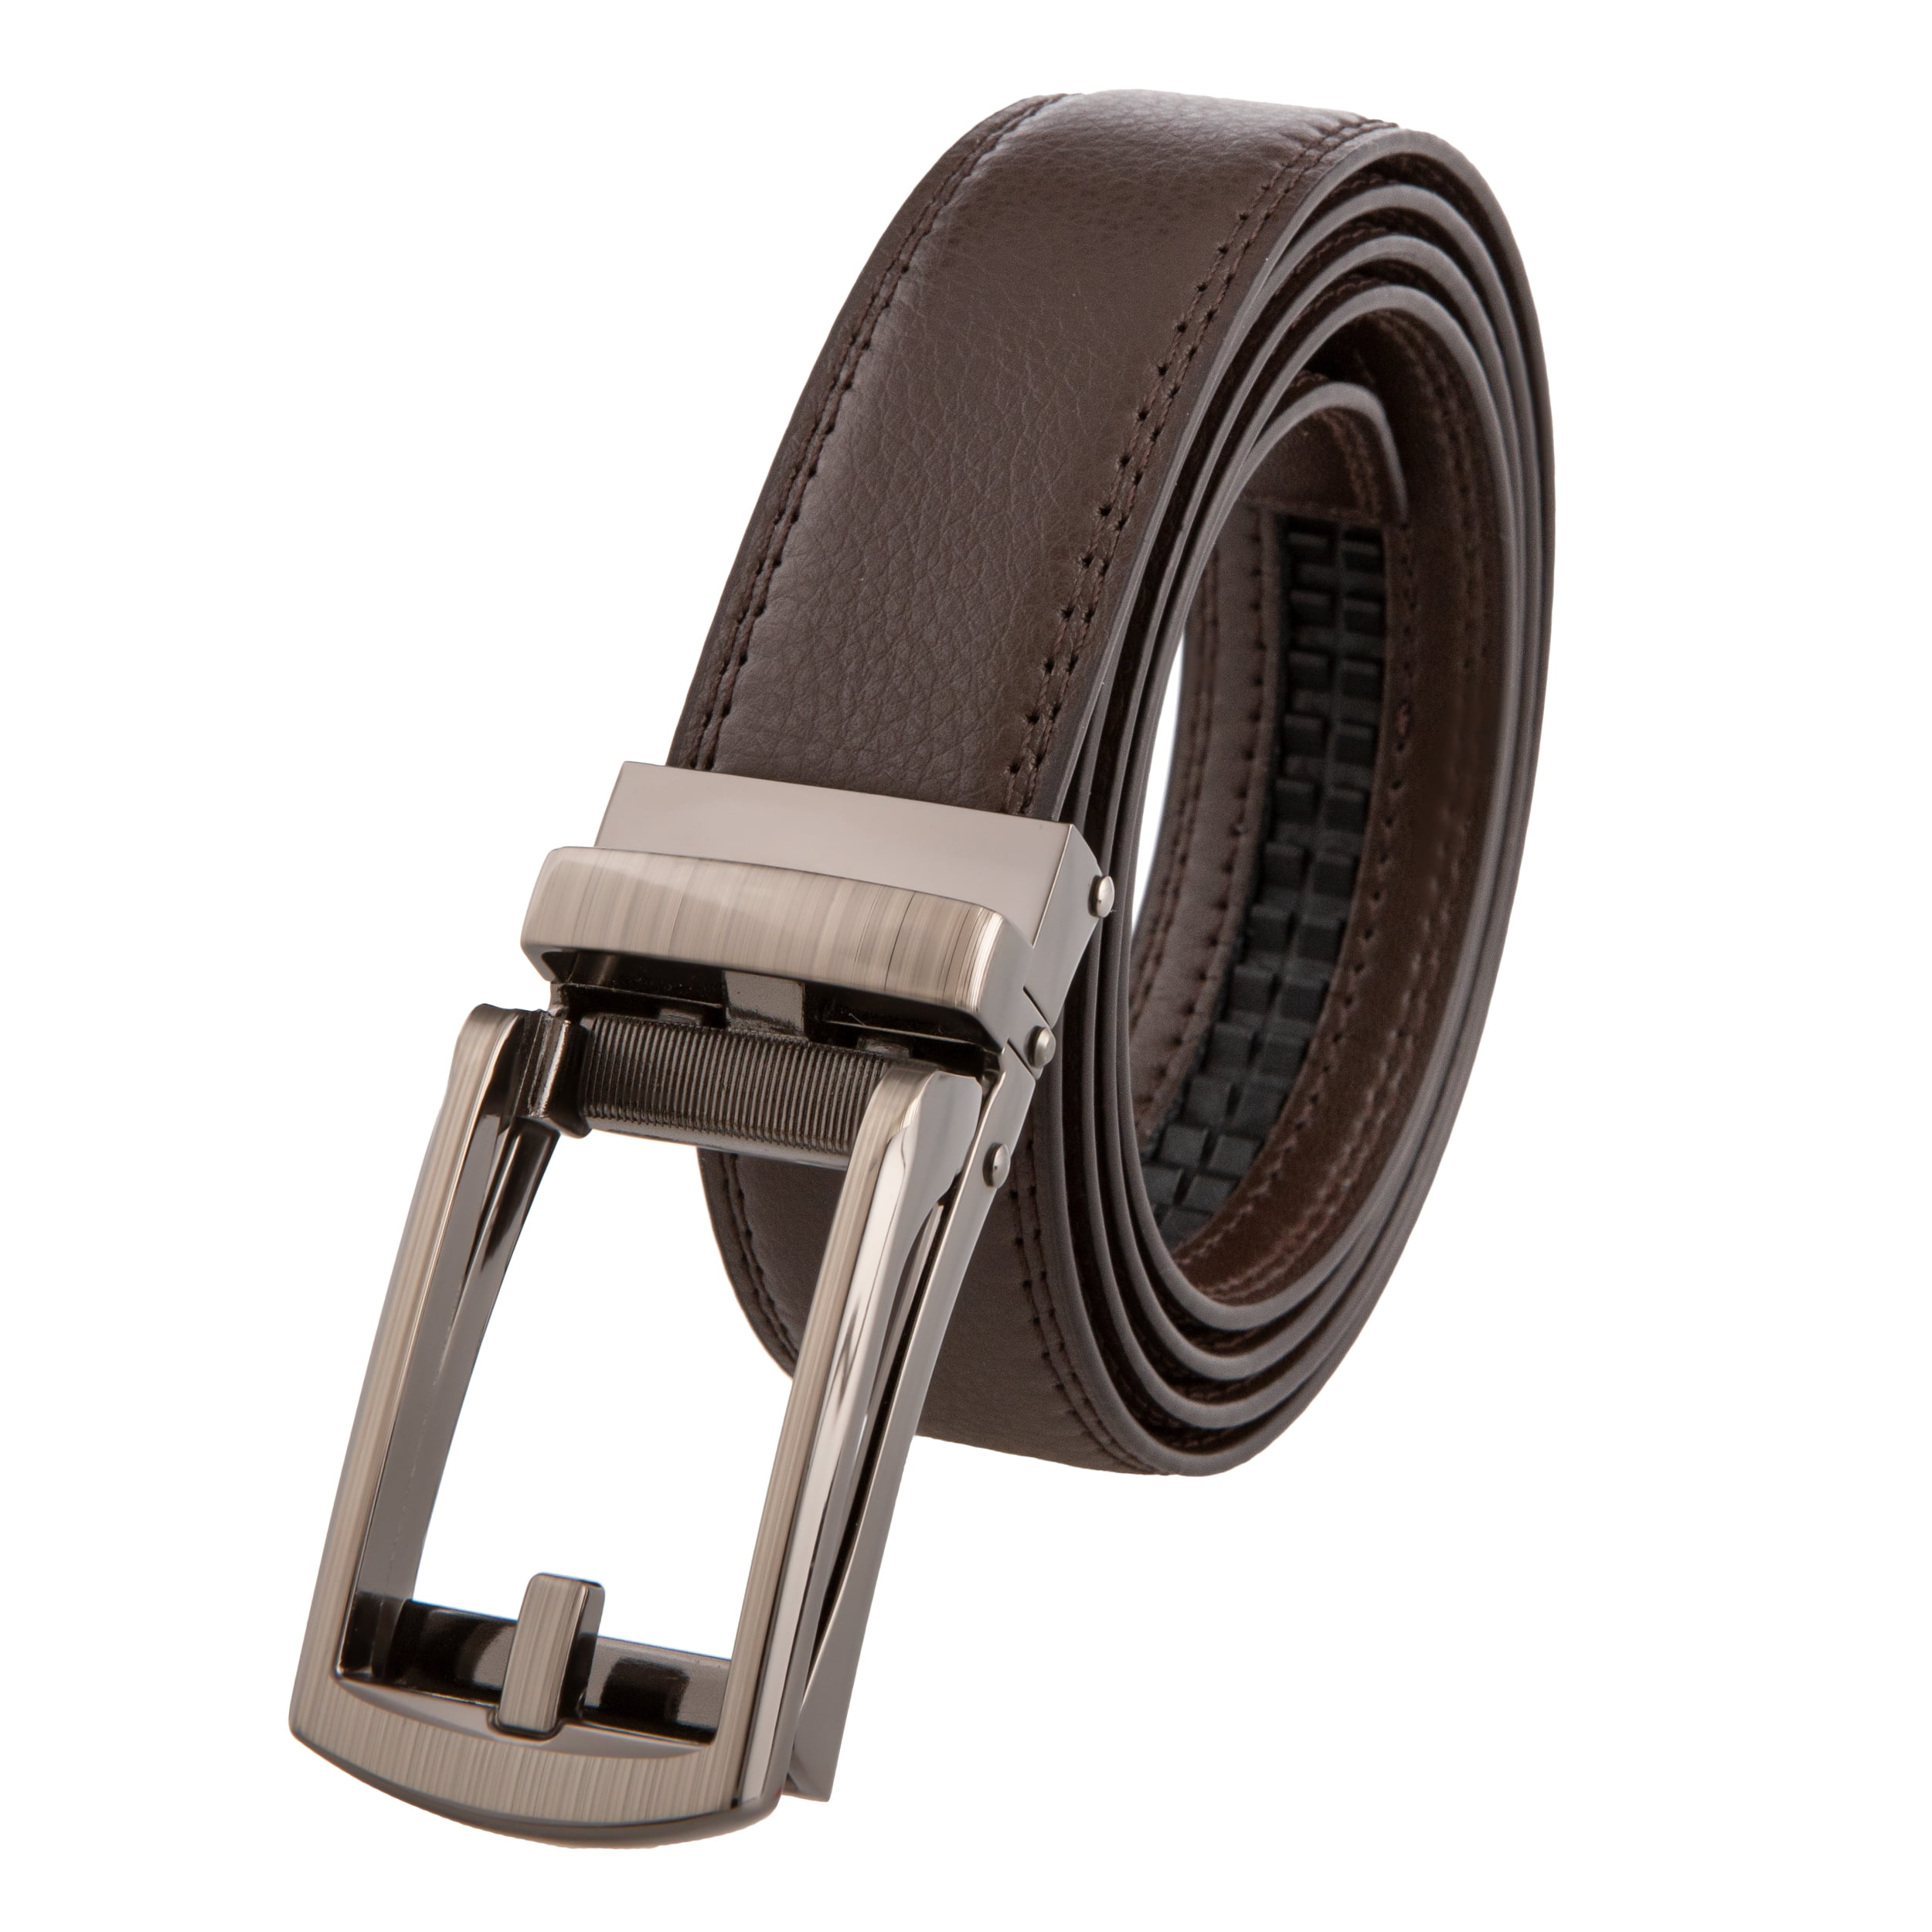 COMFORT CLICK Leather Belt Automatic Adjustable Xmas Men Gift As Seen On TV US 